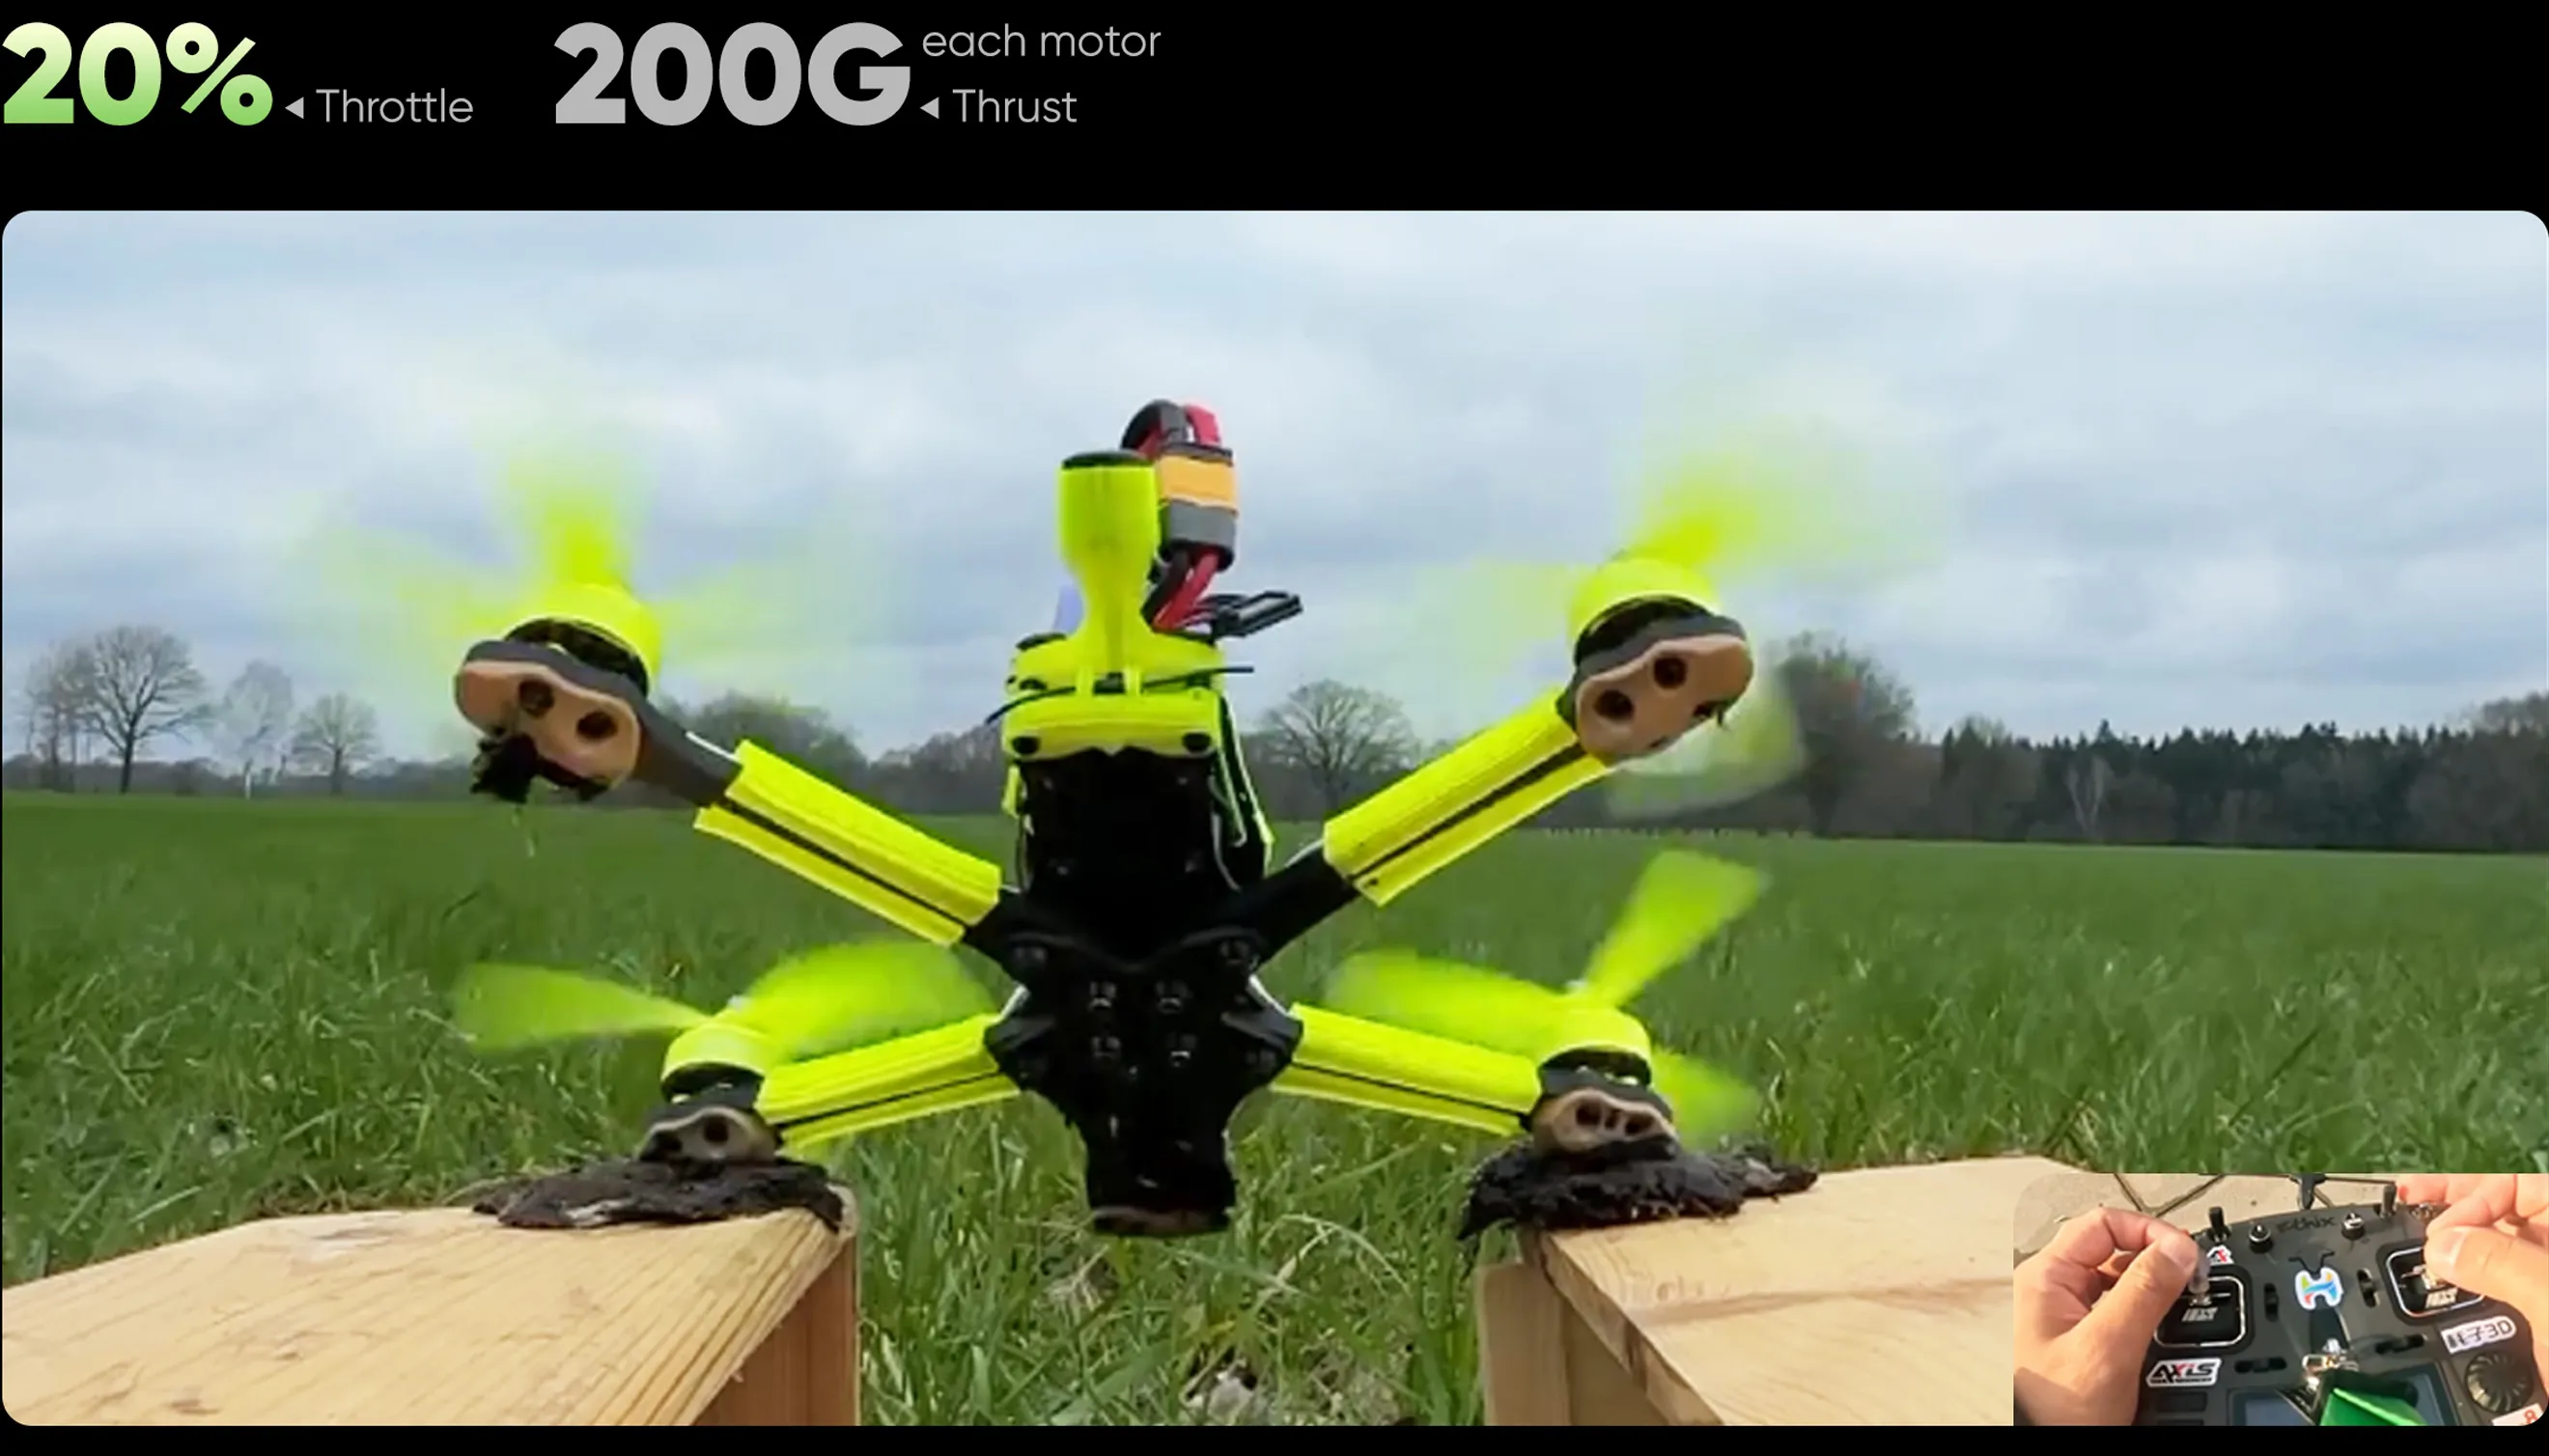 SZ2306 FPV brushless motors takeoff at a top speed